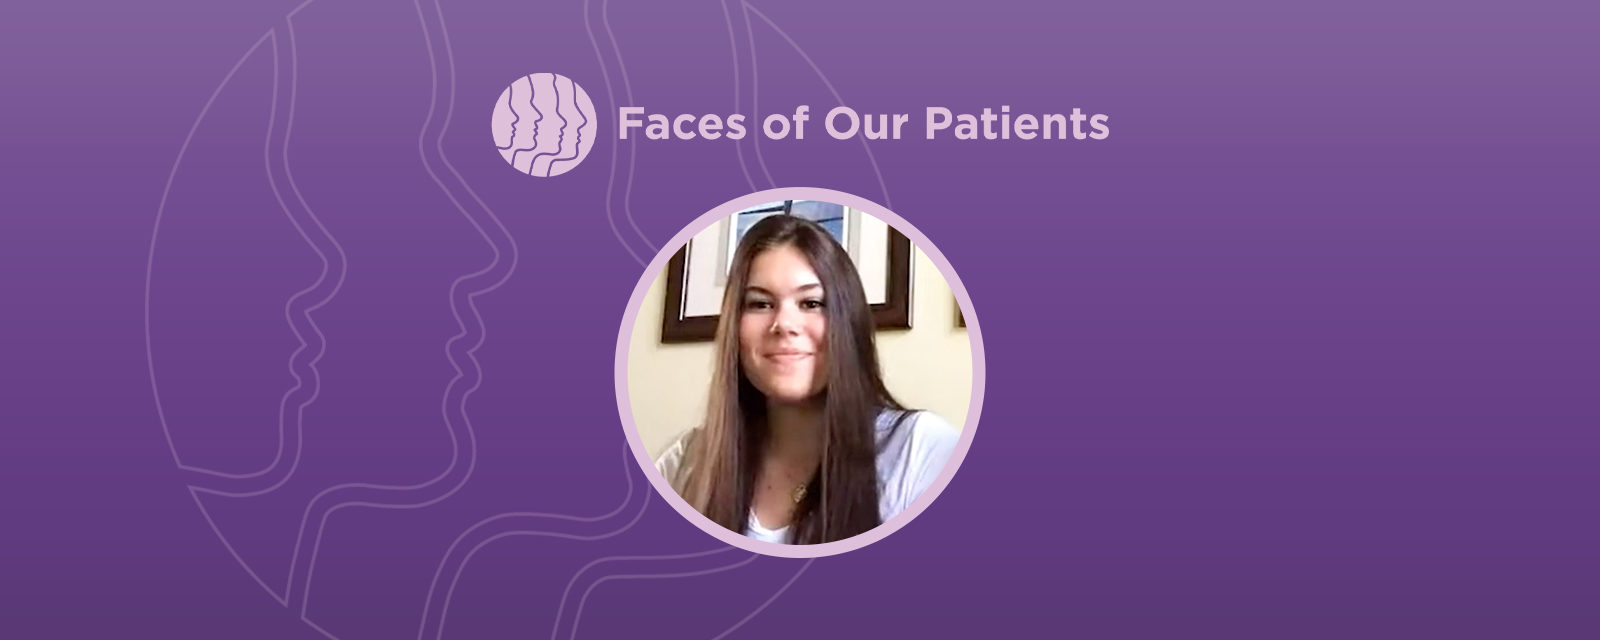 Faces of Our Patients: Pediatric Rheumatic Diseases